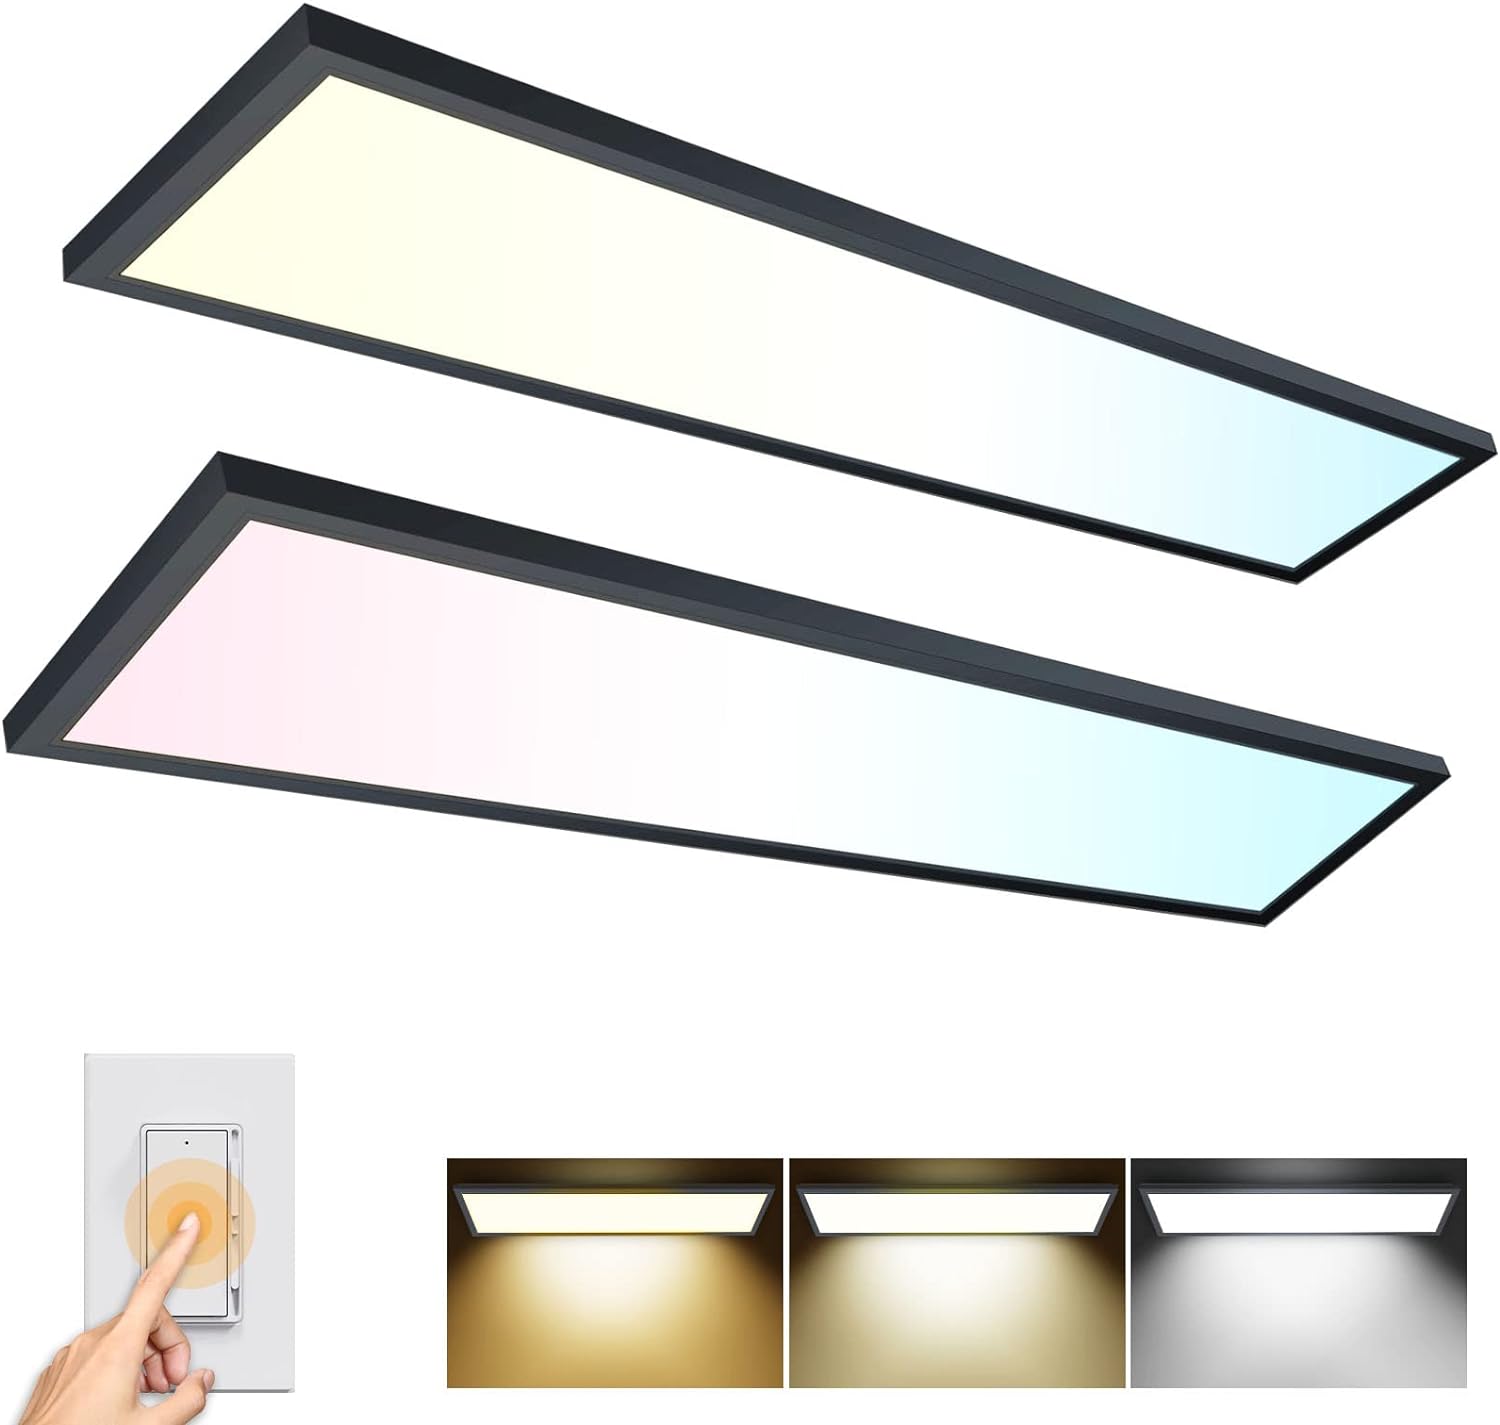 AIKVSXER 1x4 LED Flat Panel Light CPANL Surface Mount LED Ceiling Light Black, 5500LM 50W TRIAC 10-100% Dimmable, 3000/4000/5000k Selectable 4 Foot LED Light Fixture for Kitchen/Laundry/Garage 2PACK